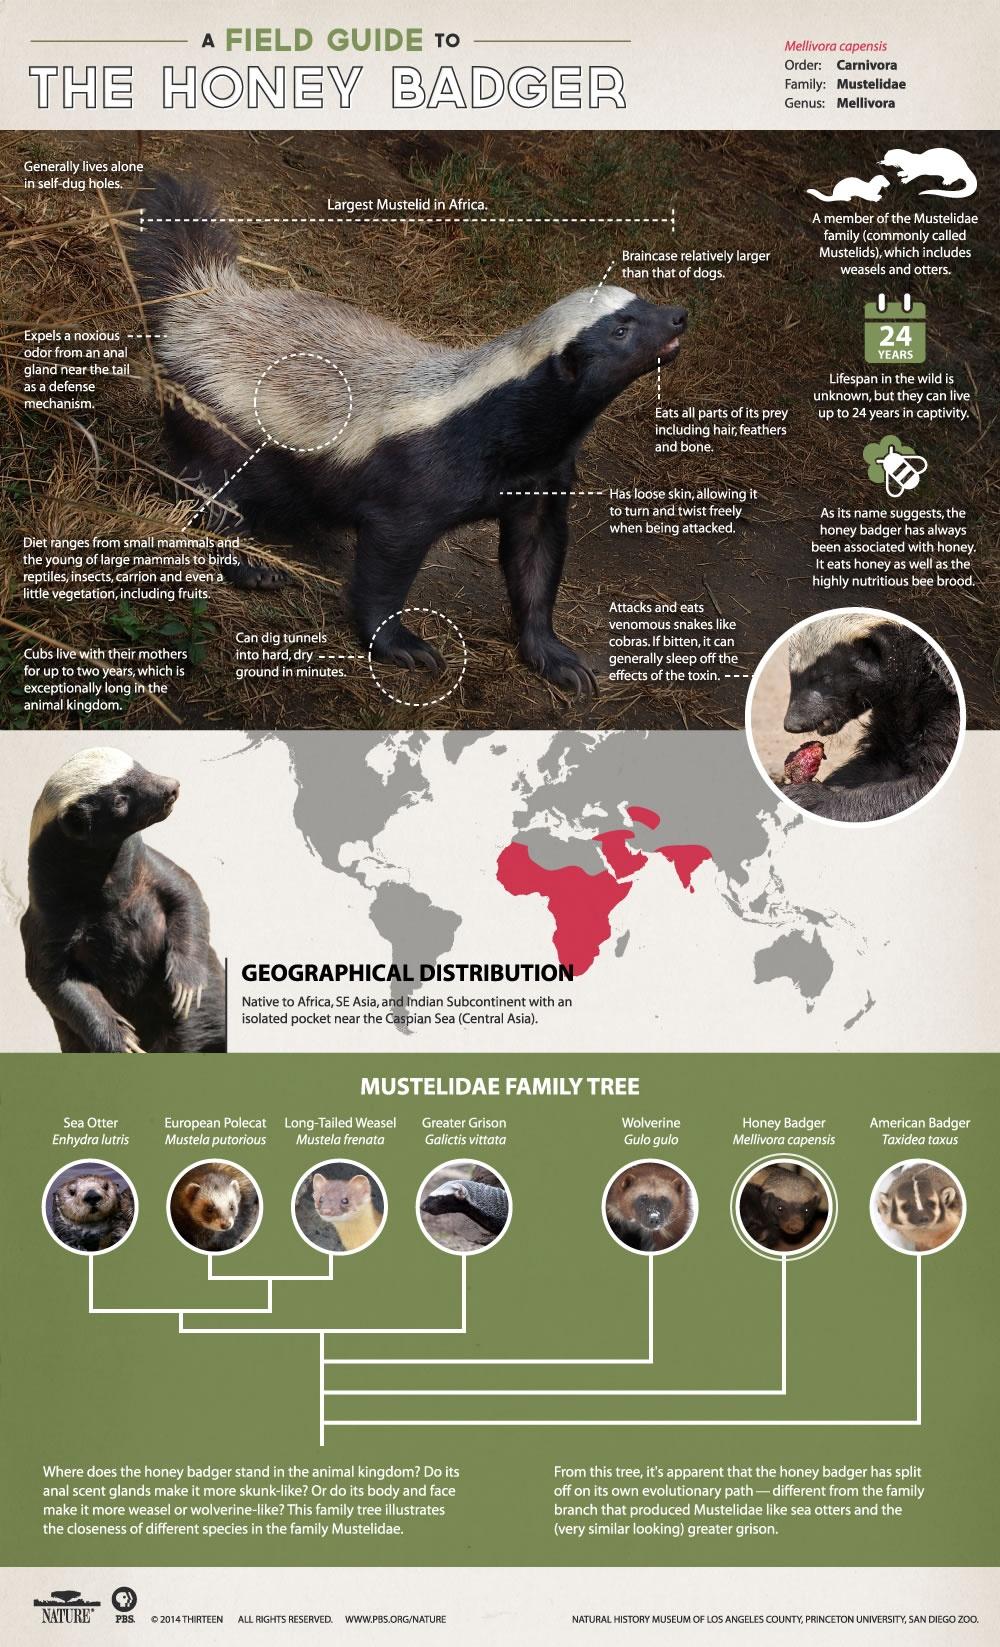 https://image.pbs.org/poster_images/assets/A_Field_Guide_to_the_Honey_Badger.jpg